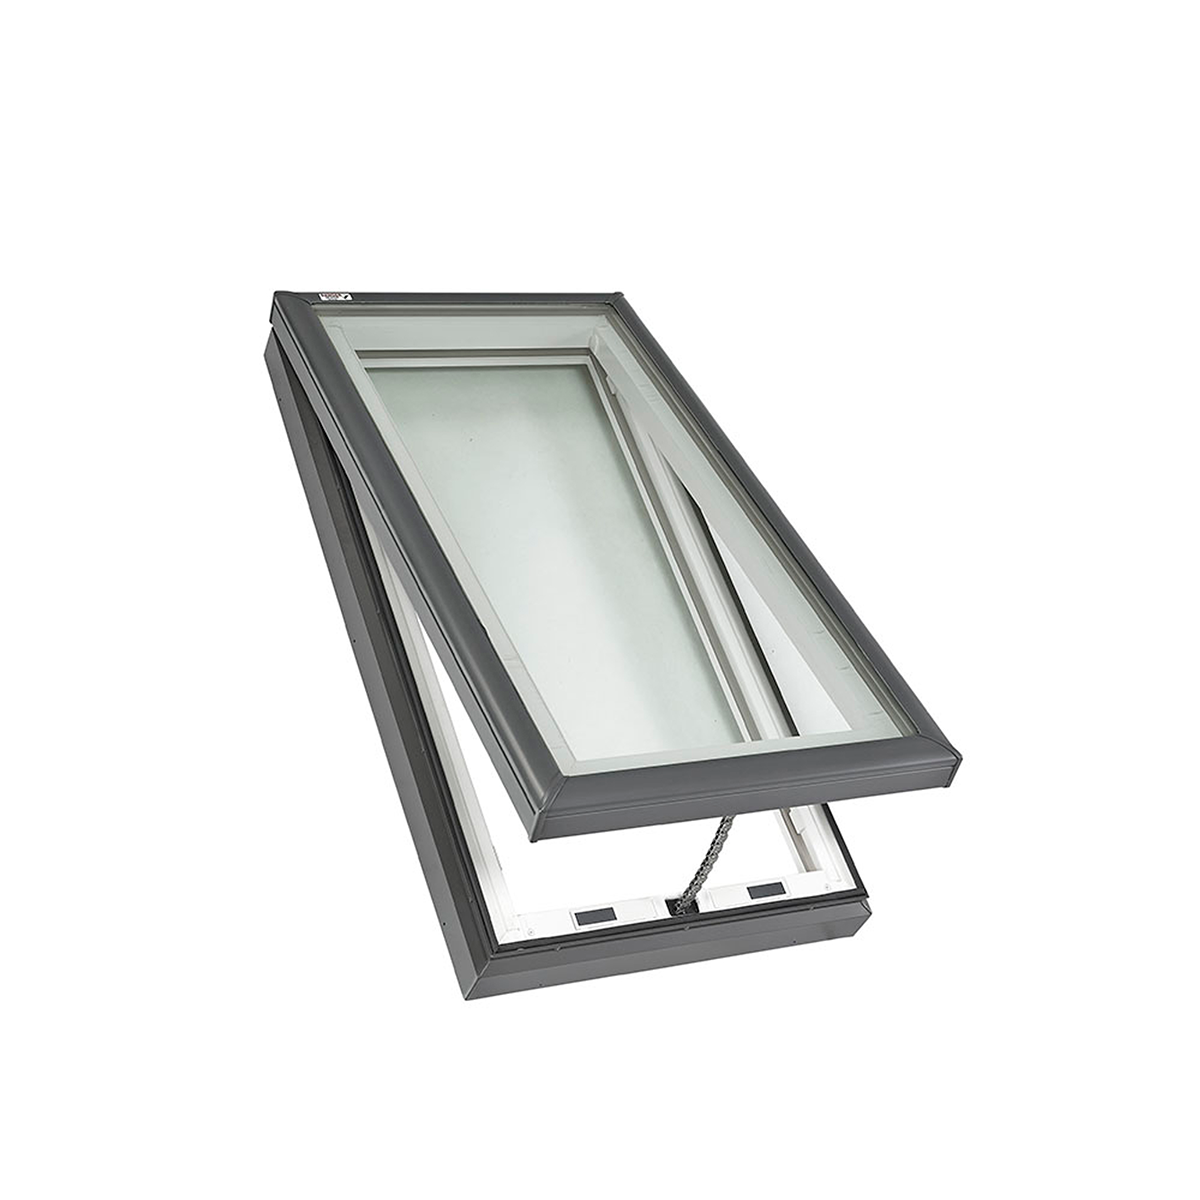 Manual Curb-Mount Skylight with Laminated Low-E3 Glass - 22-1/2 in. x 22-1/2 in. - VCM 2222